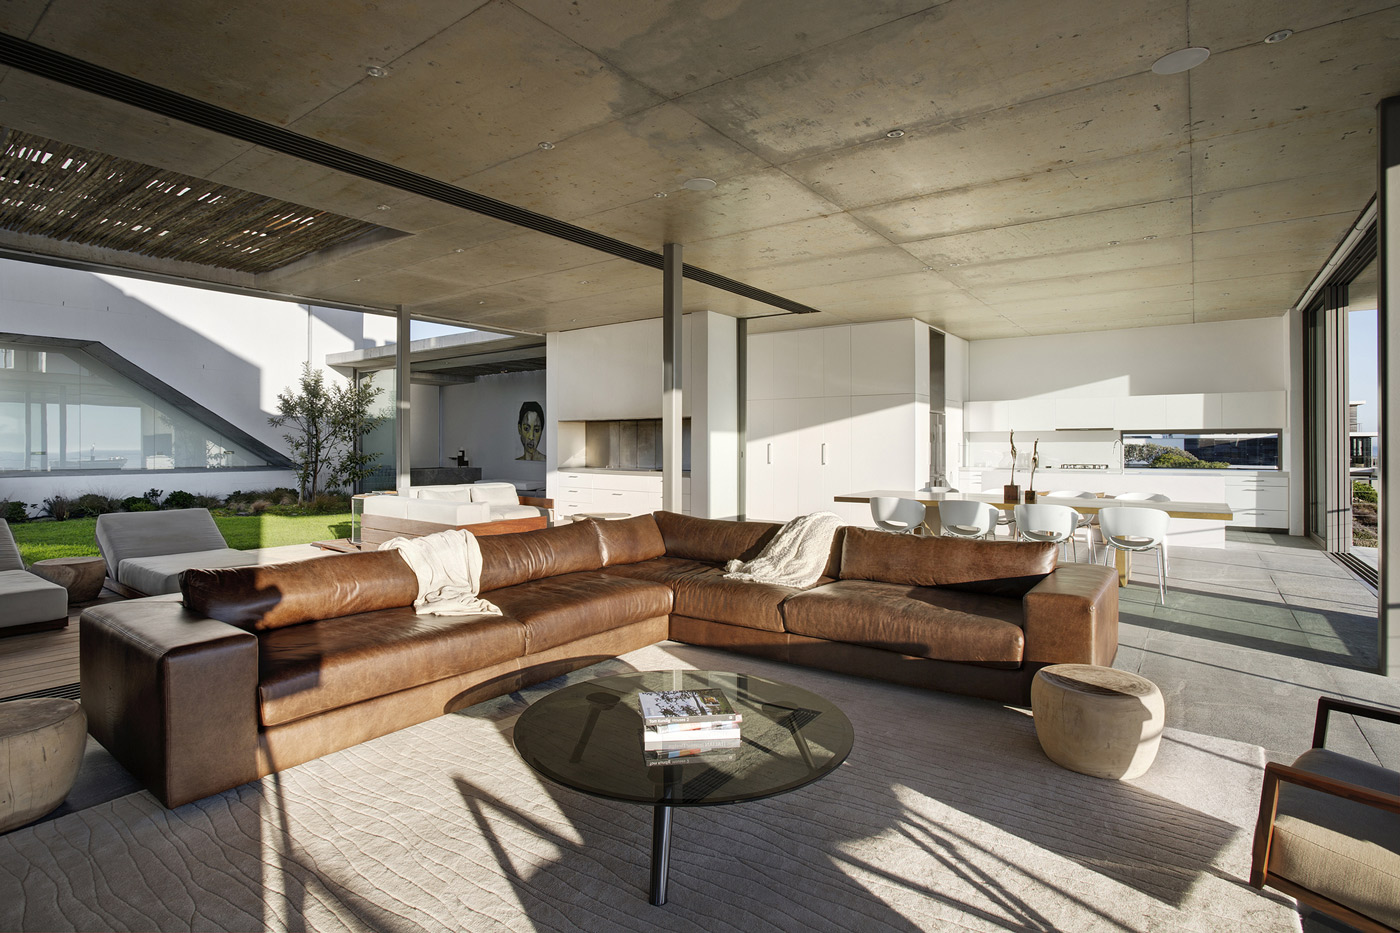 Brown Leather Sofas, Glass Coffee Table, Open Plan Living Space, Holiday Home in Yzerfontein, South Africa